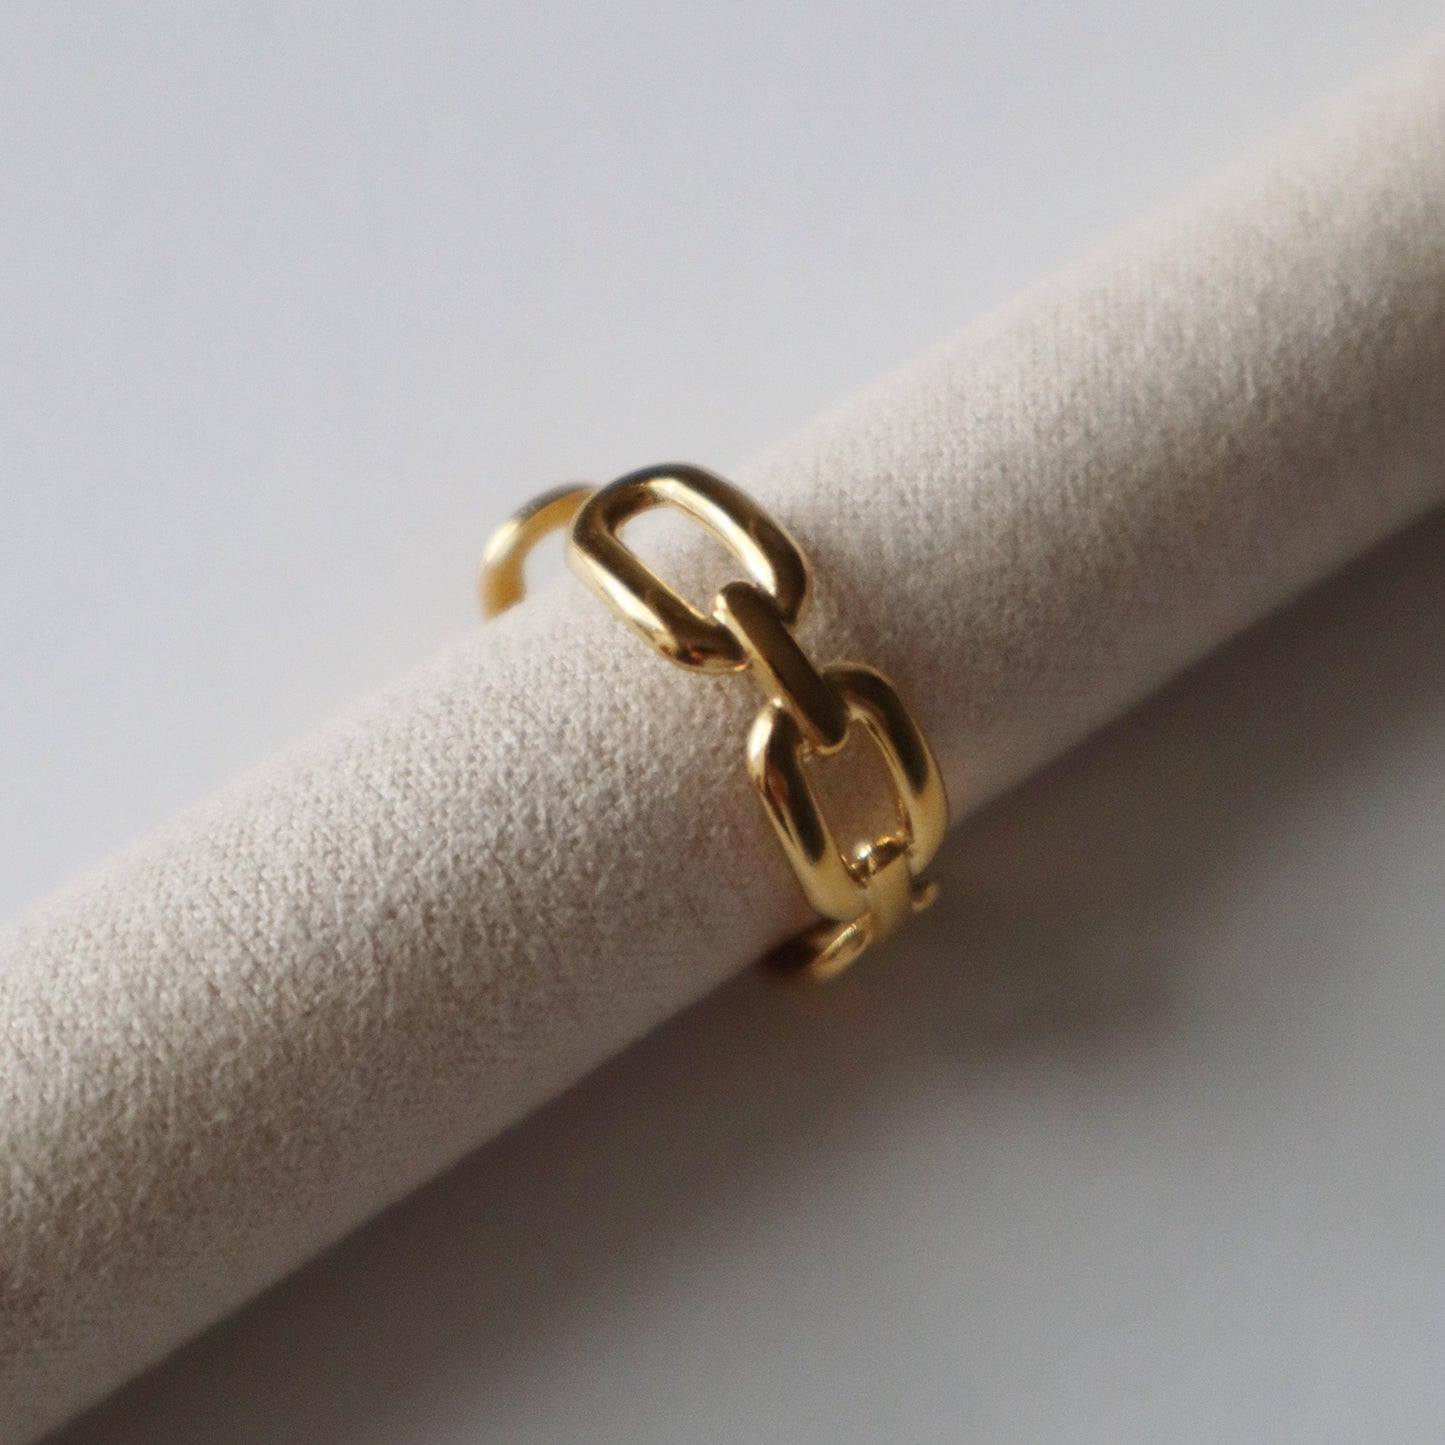 Chain Link Ring | Adjustable Ring - JESSA JEWELRY | GOLD JEWELRY; dainty, affordable gold everyday jewelry. Tarnish free, water-resistant, hypoallergenic. Jewelry for everyday wear